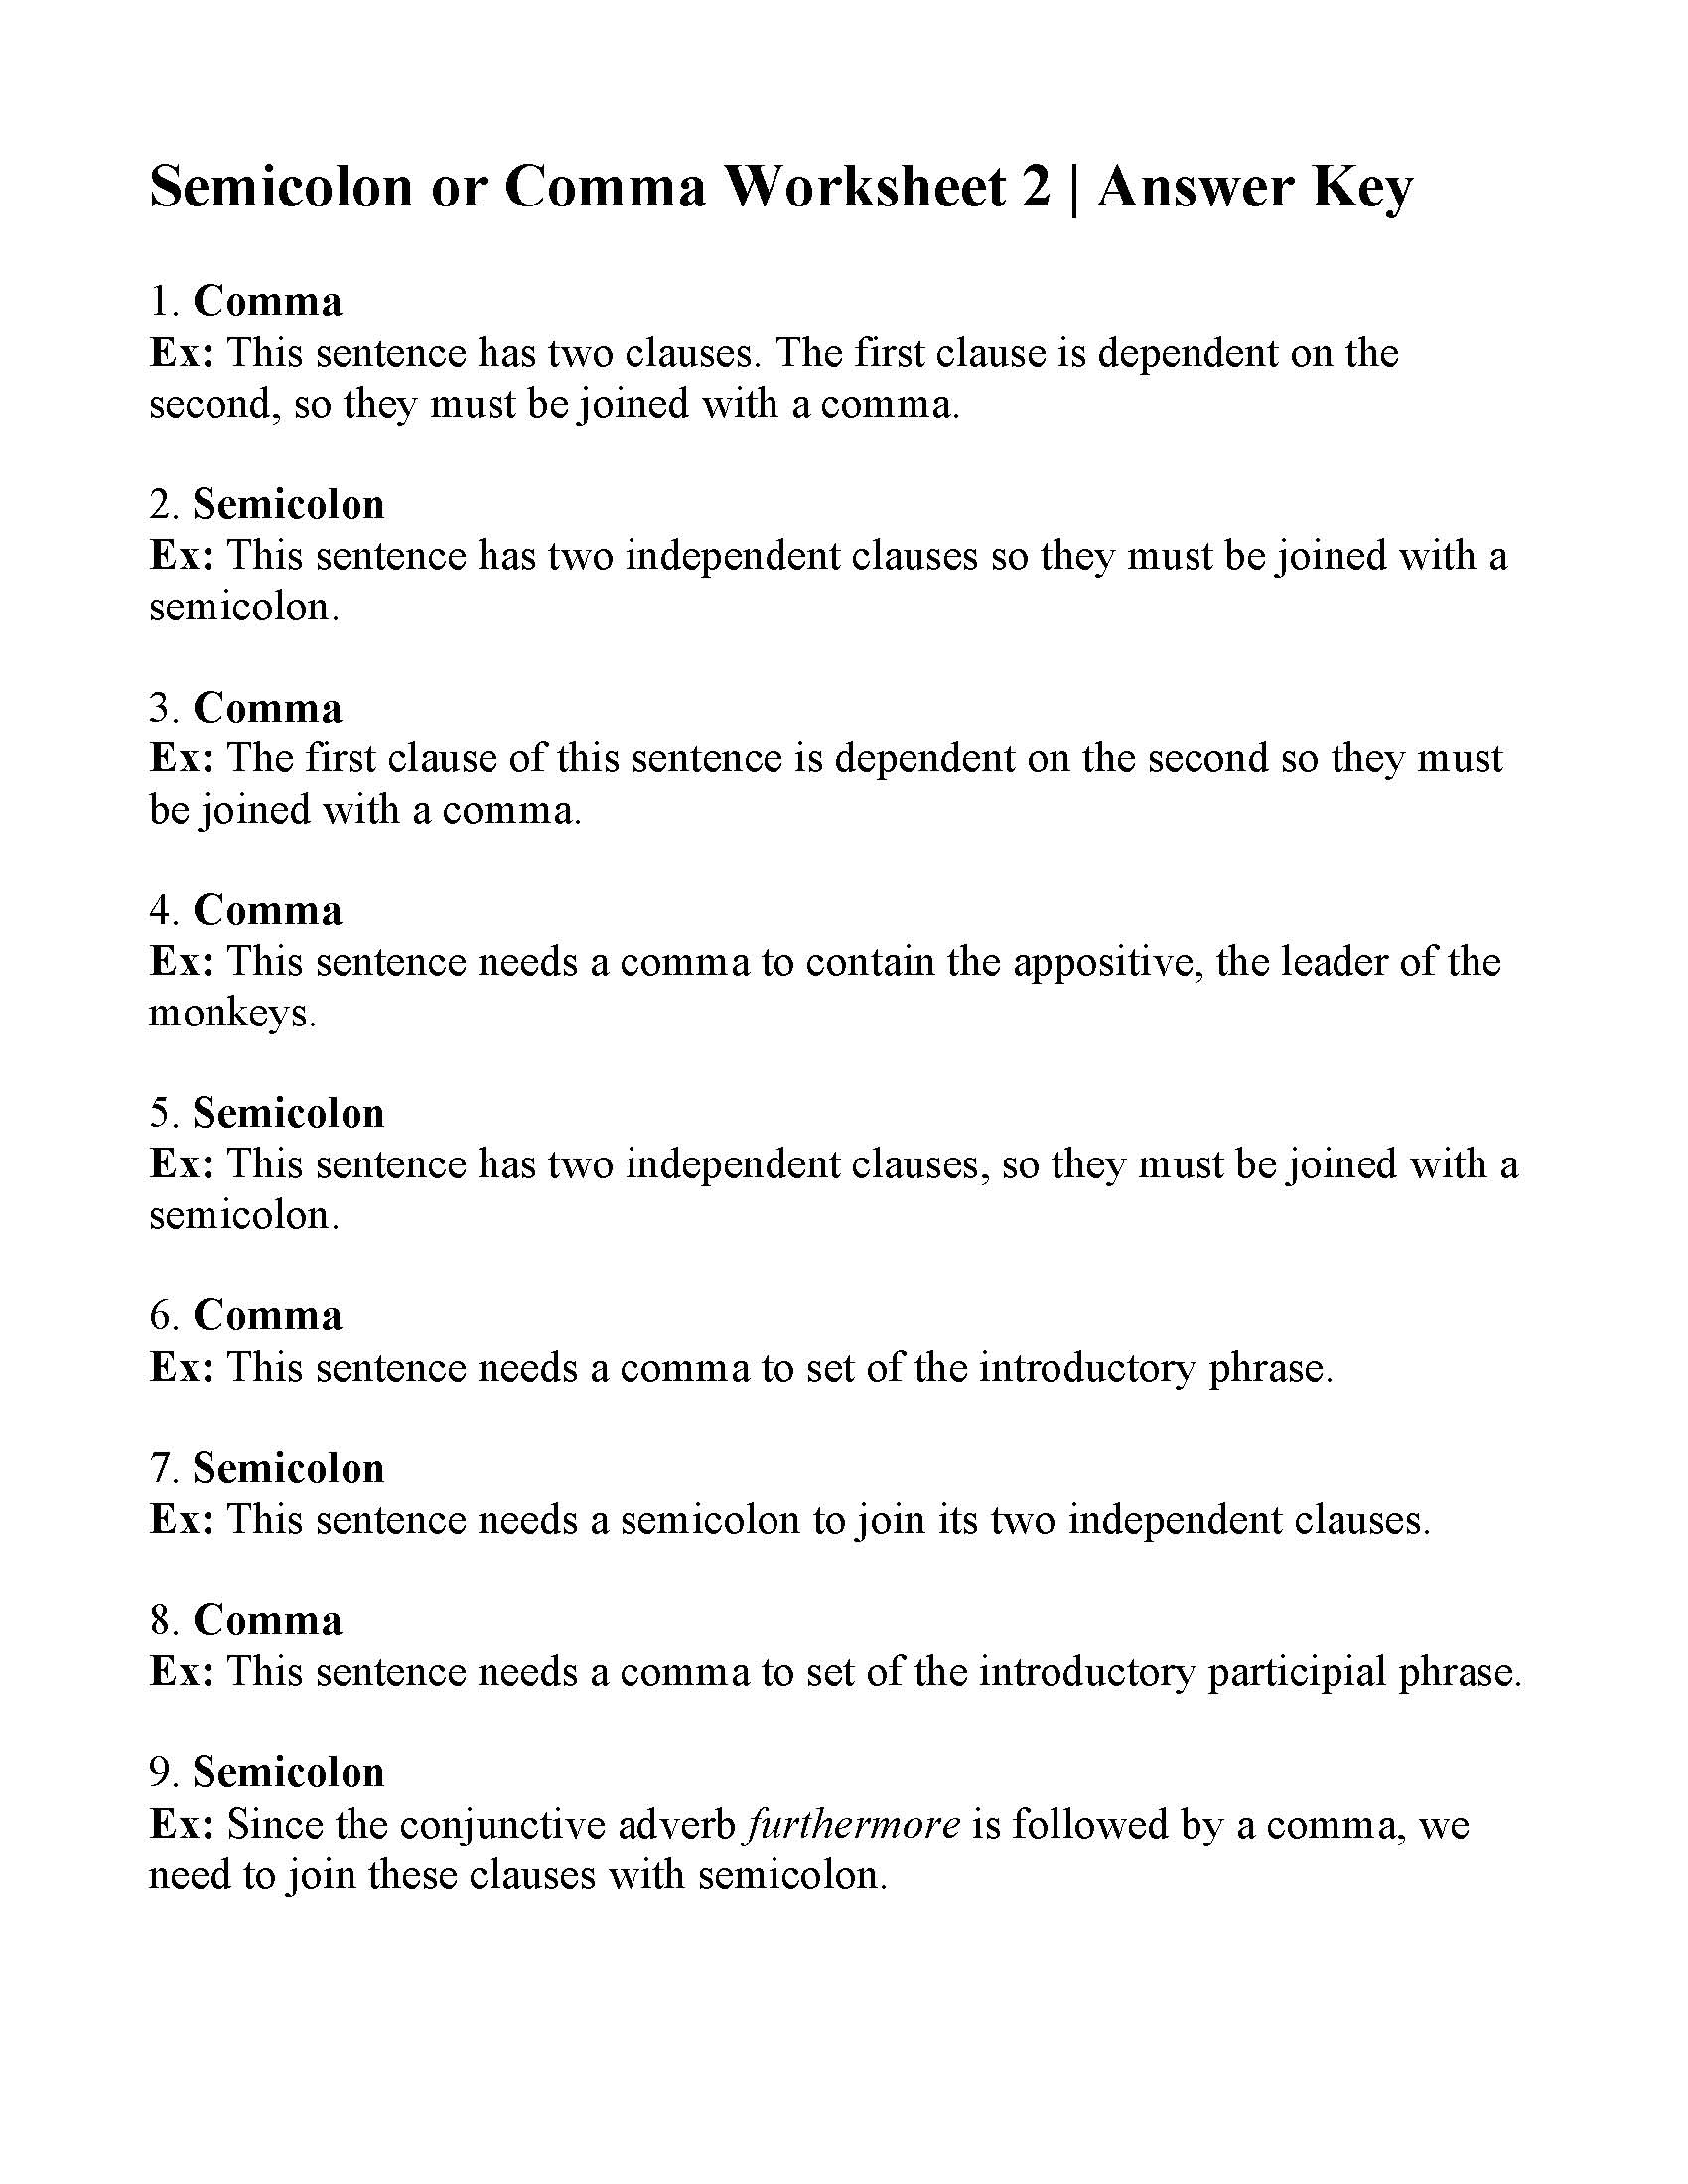 This is the answer key for the Commas or Semicolons Worksheet 2.